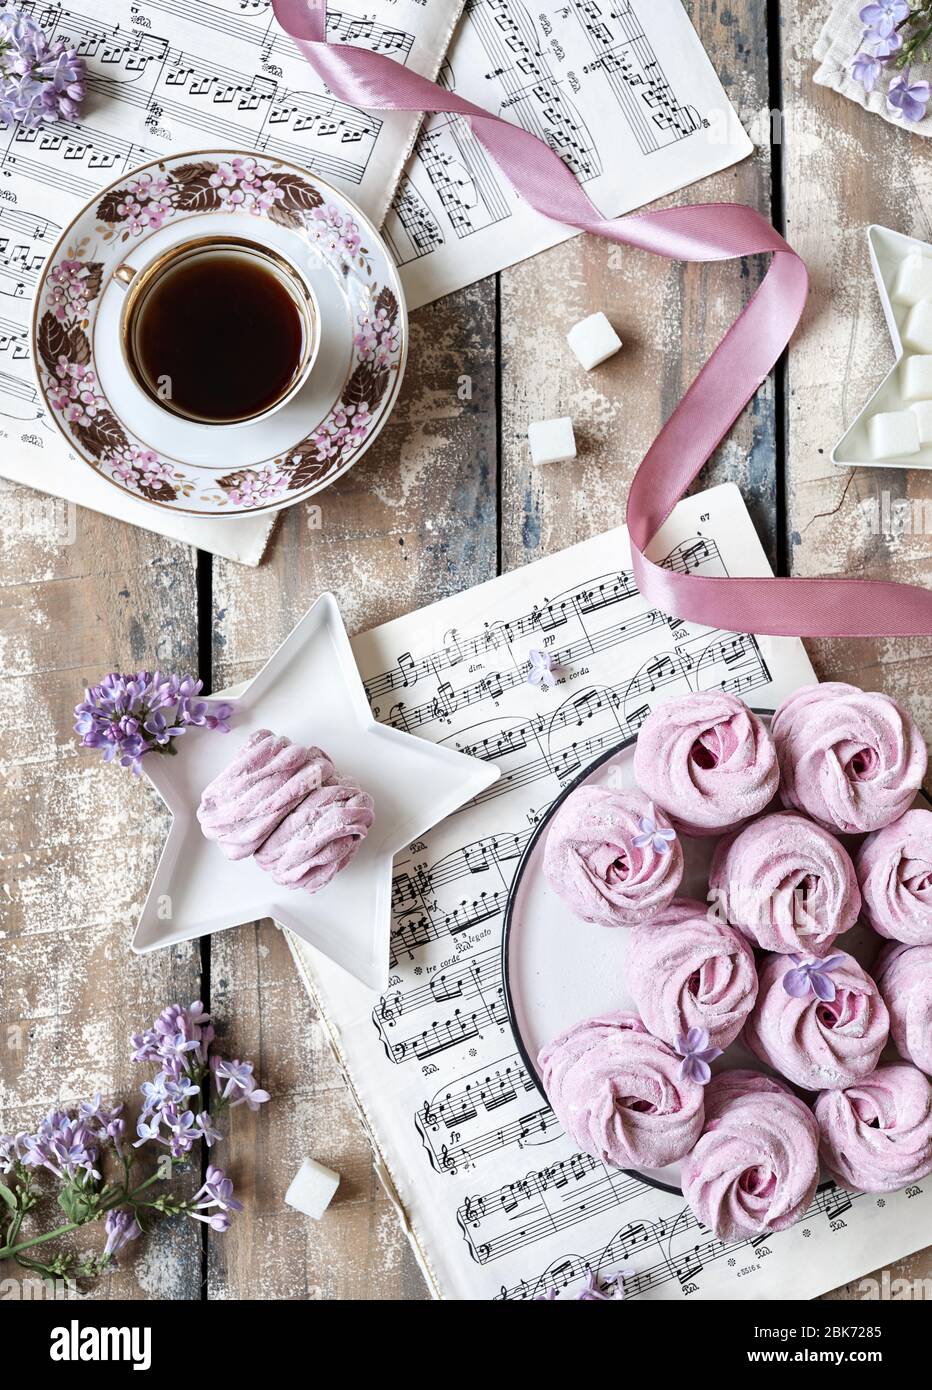 MOSCOW, RUSSIA – APRIL 3, 2020: Illustrative editorial photo with old music sheets and Violet sweet homemade Zephyr or Marshmallow from black currant Stock Photo